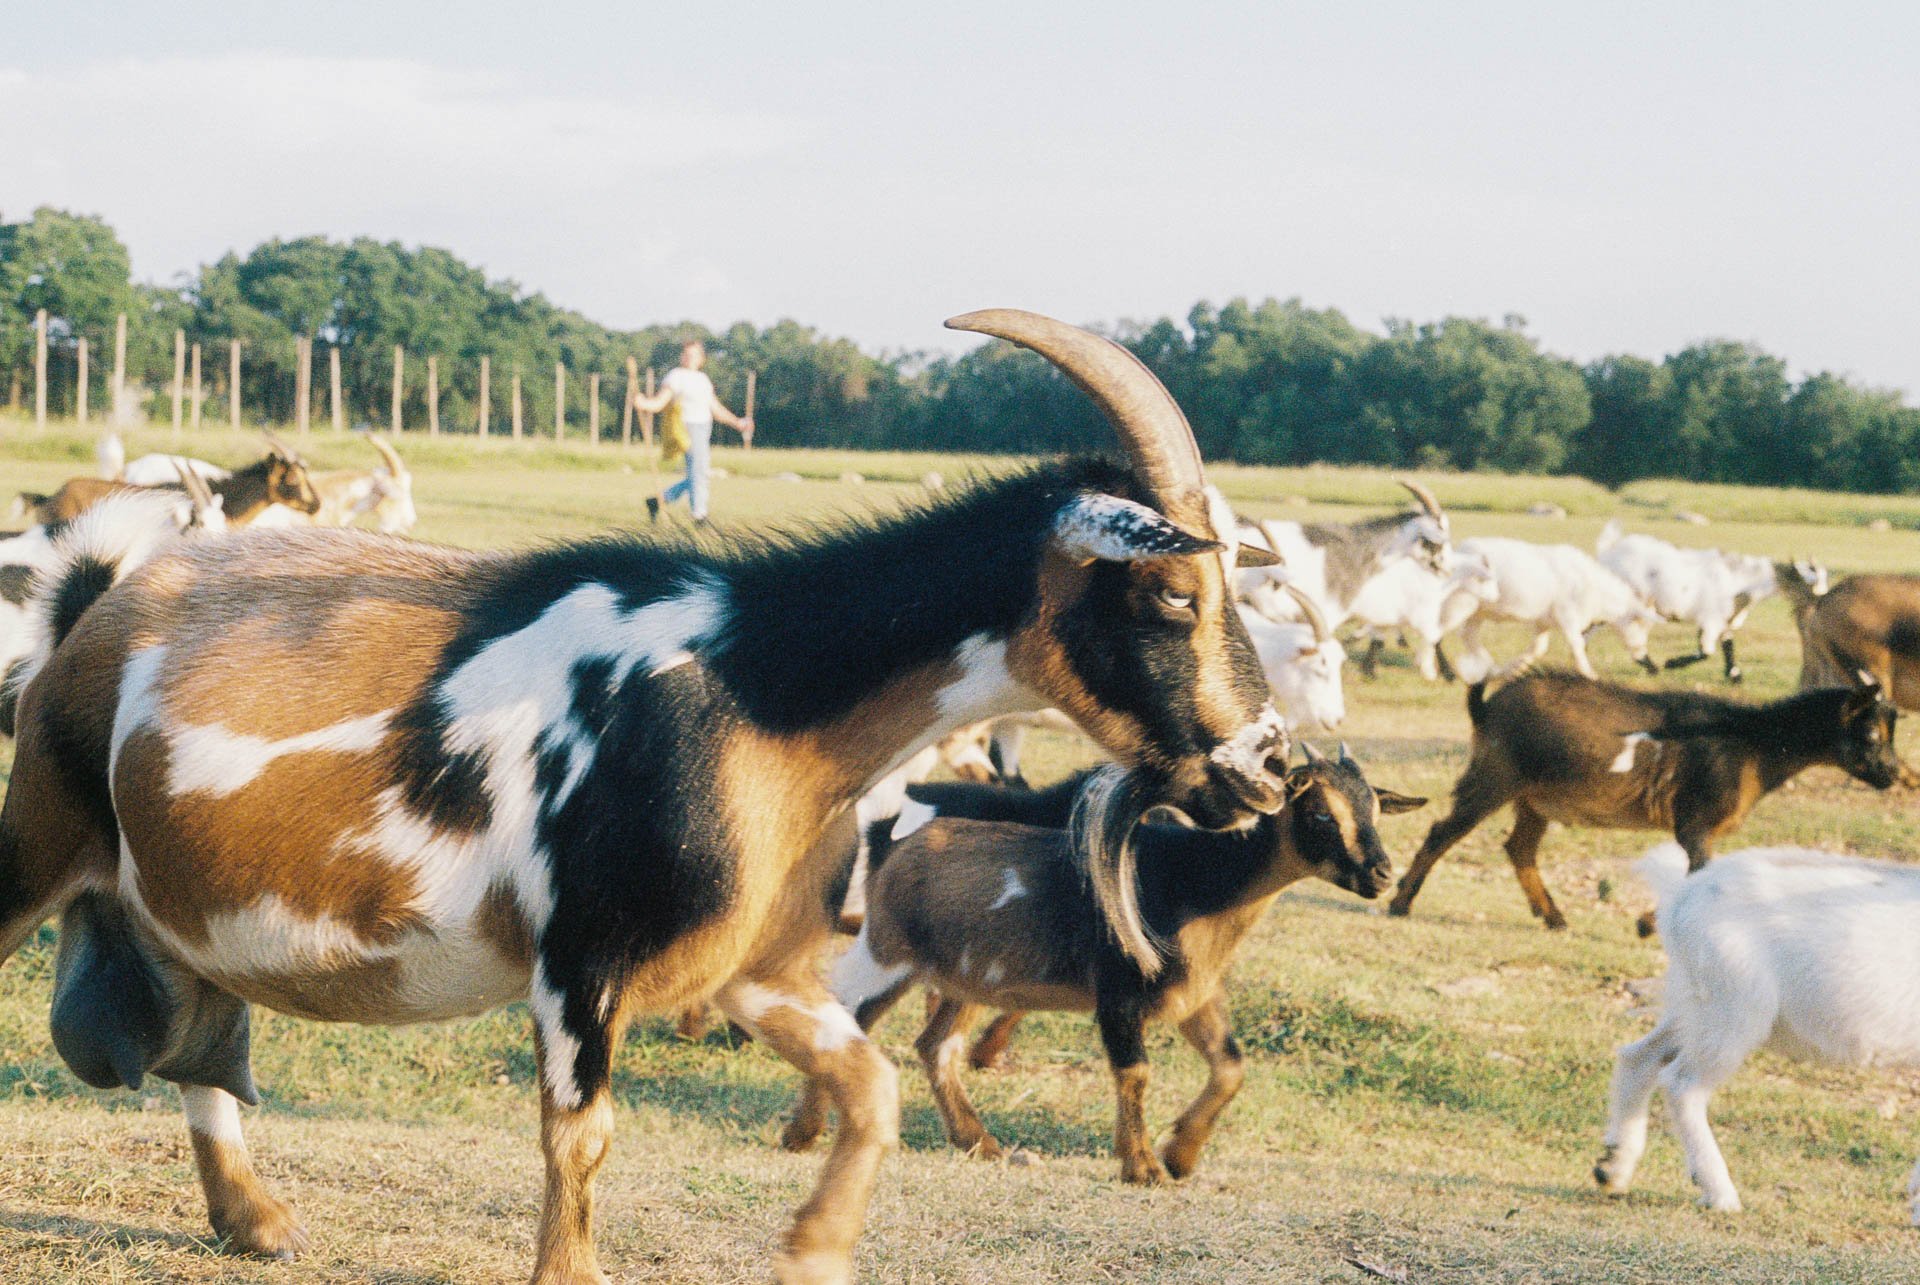 Goats-at-Jester-King-Brewing-in-Texas-on-Film.jpg